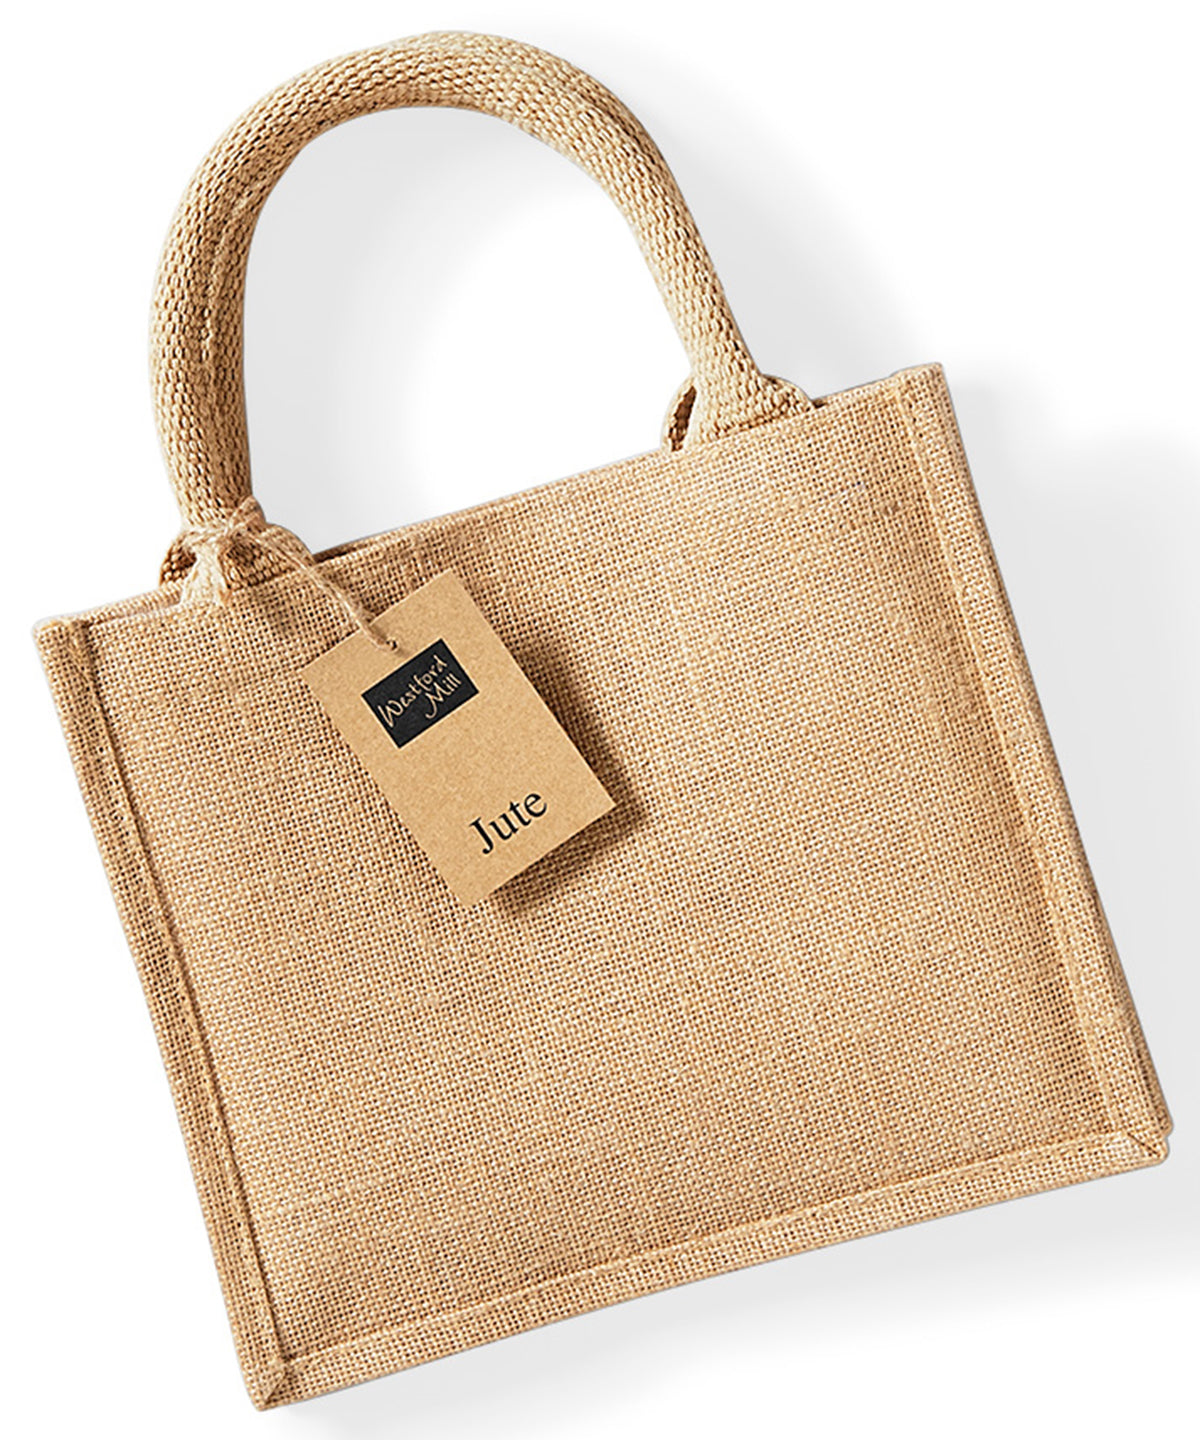 Personalised Jute Bags | Jute Bag With Leather Strap